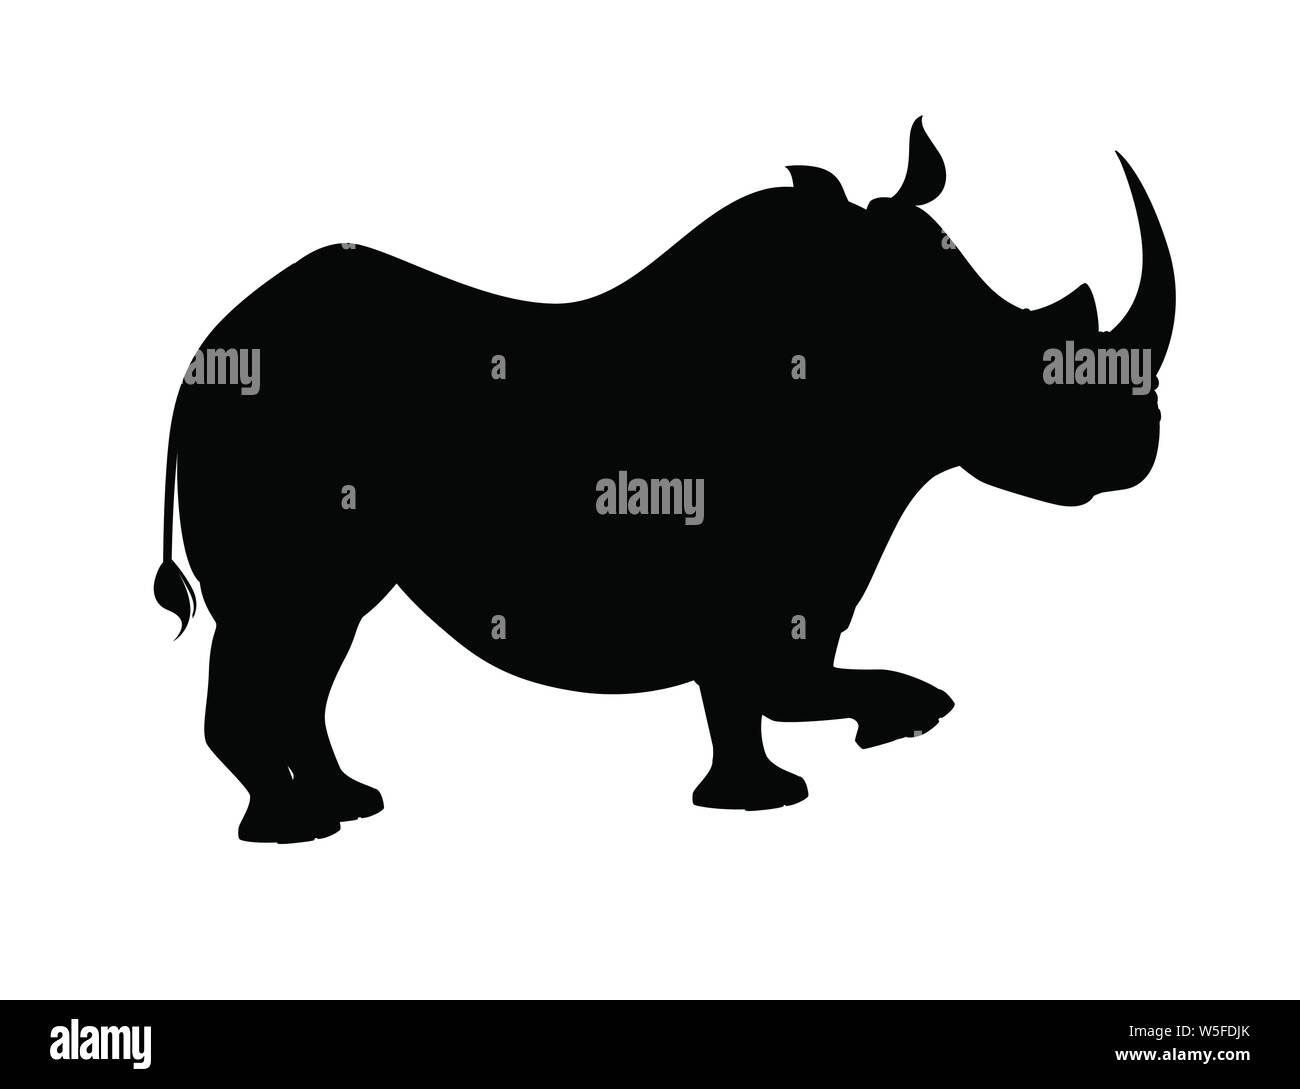 Black silhouette african rhinoceros side view cartoon animal design flat vector illustration isolated on white background. Stock Vector